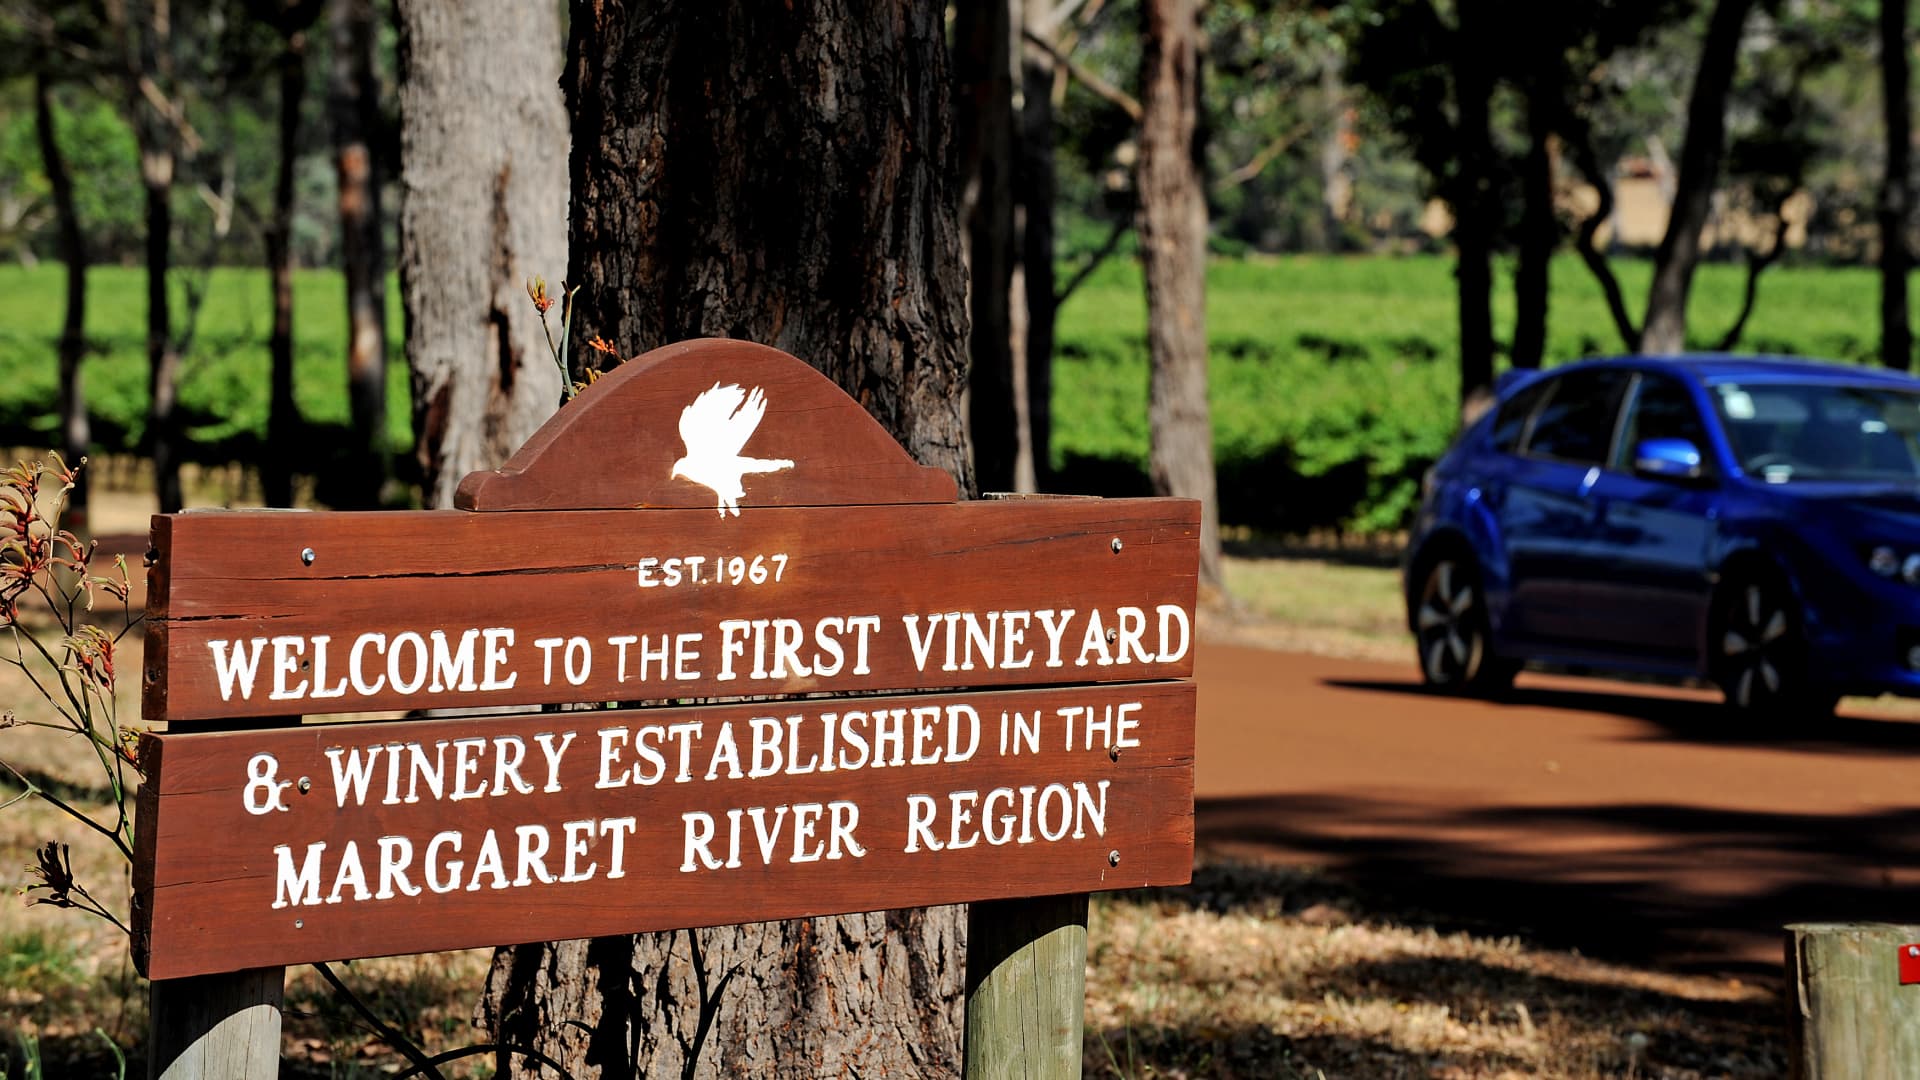 The entrance to Vasse Felix, Margaret River's oldest winery, shows the relative youthfulness of the region, even among Australian wine regions.